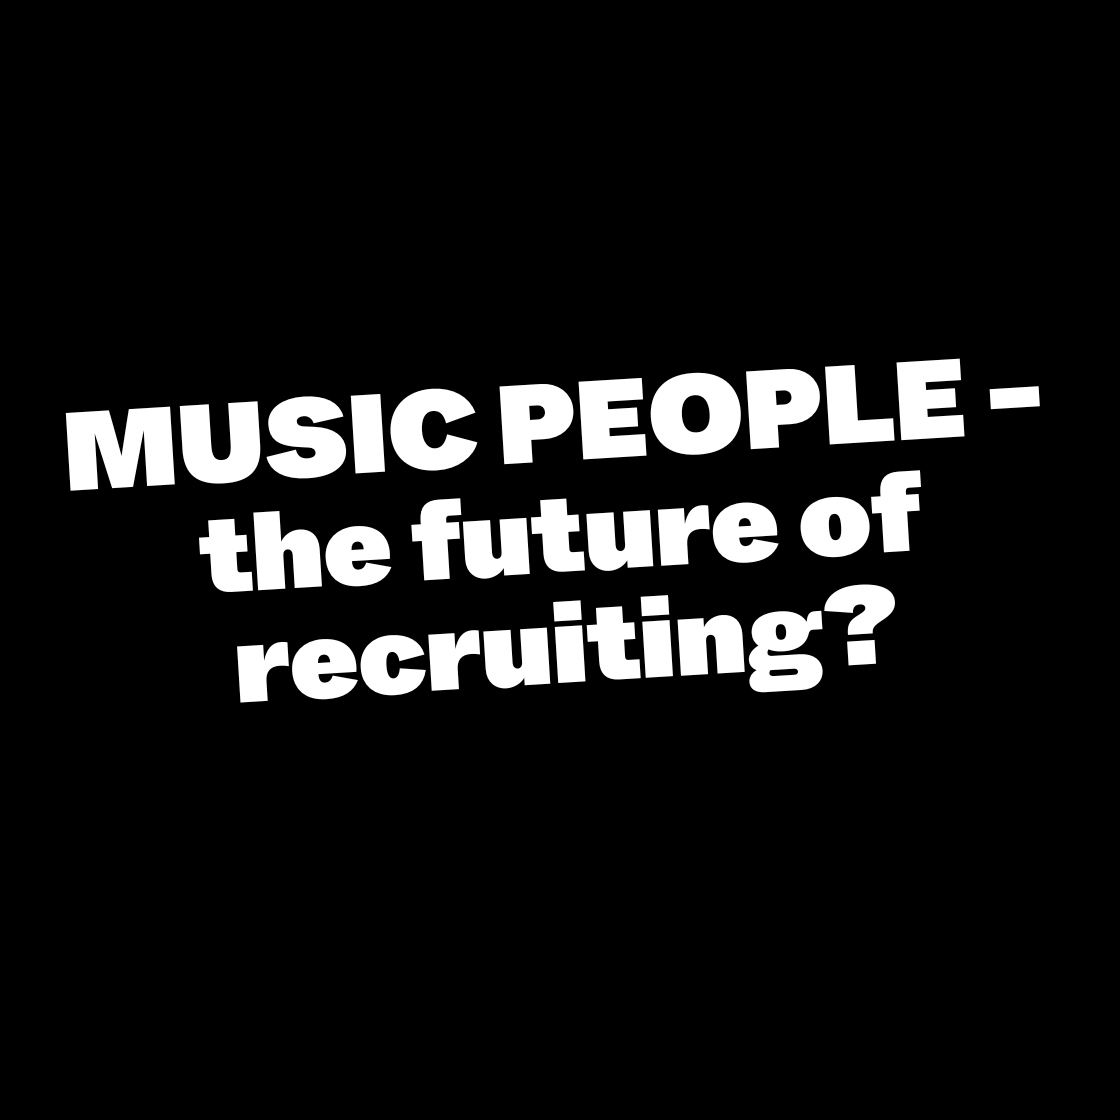 MUSIC PEOPLE - the future of recruiting?